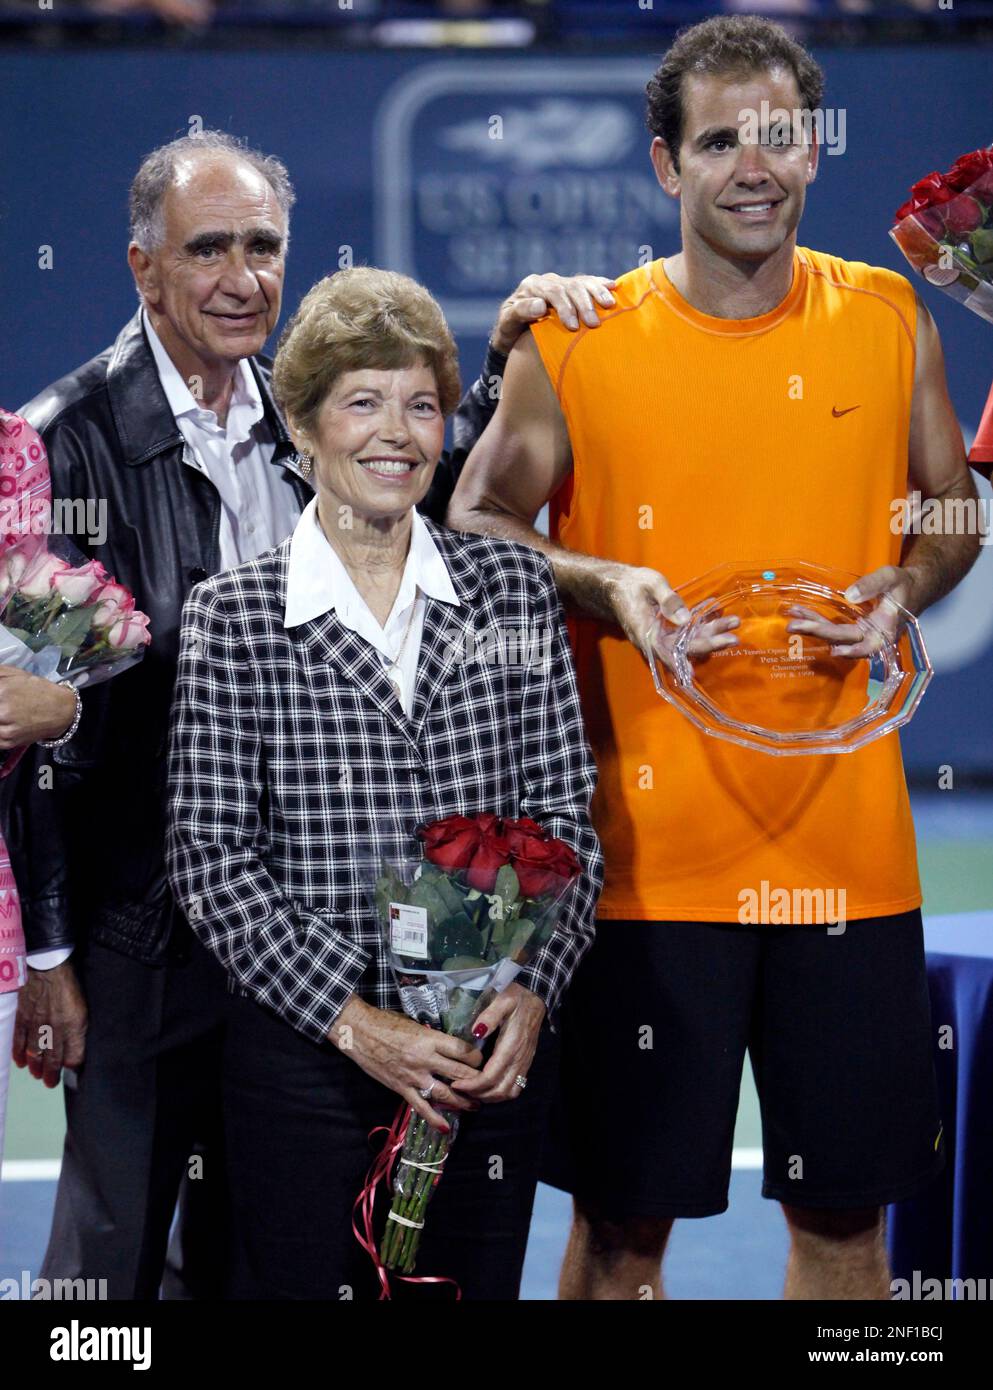 Pete Sampras, right, of the United States, poses with his parents, Sammy and Georgia, after receiving a plate during a ceremony recognizing him as the tournament honoree at the L.A. Tennis Open, Monday, July 27, 2009, in Los Angeles. (AP Photo/Danny Moloshok) Stock Photo